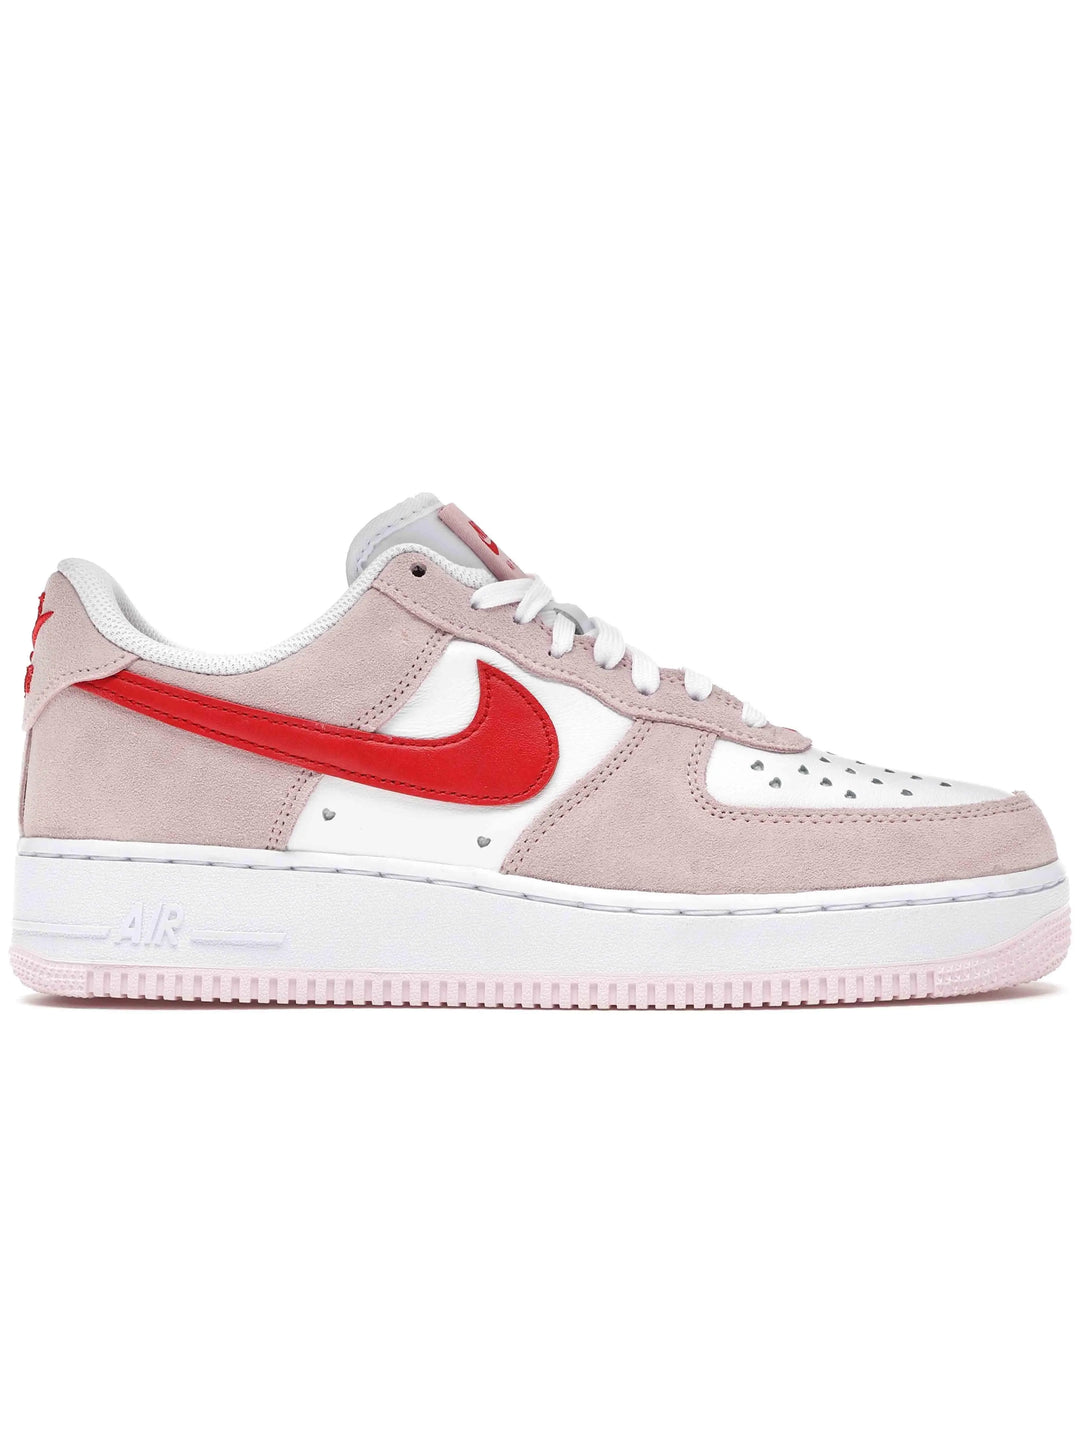 Nike Air Force 1 QS Valentine's Day Love Letter Prior